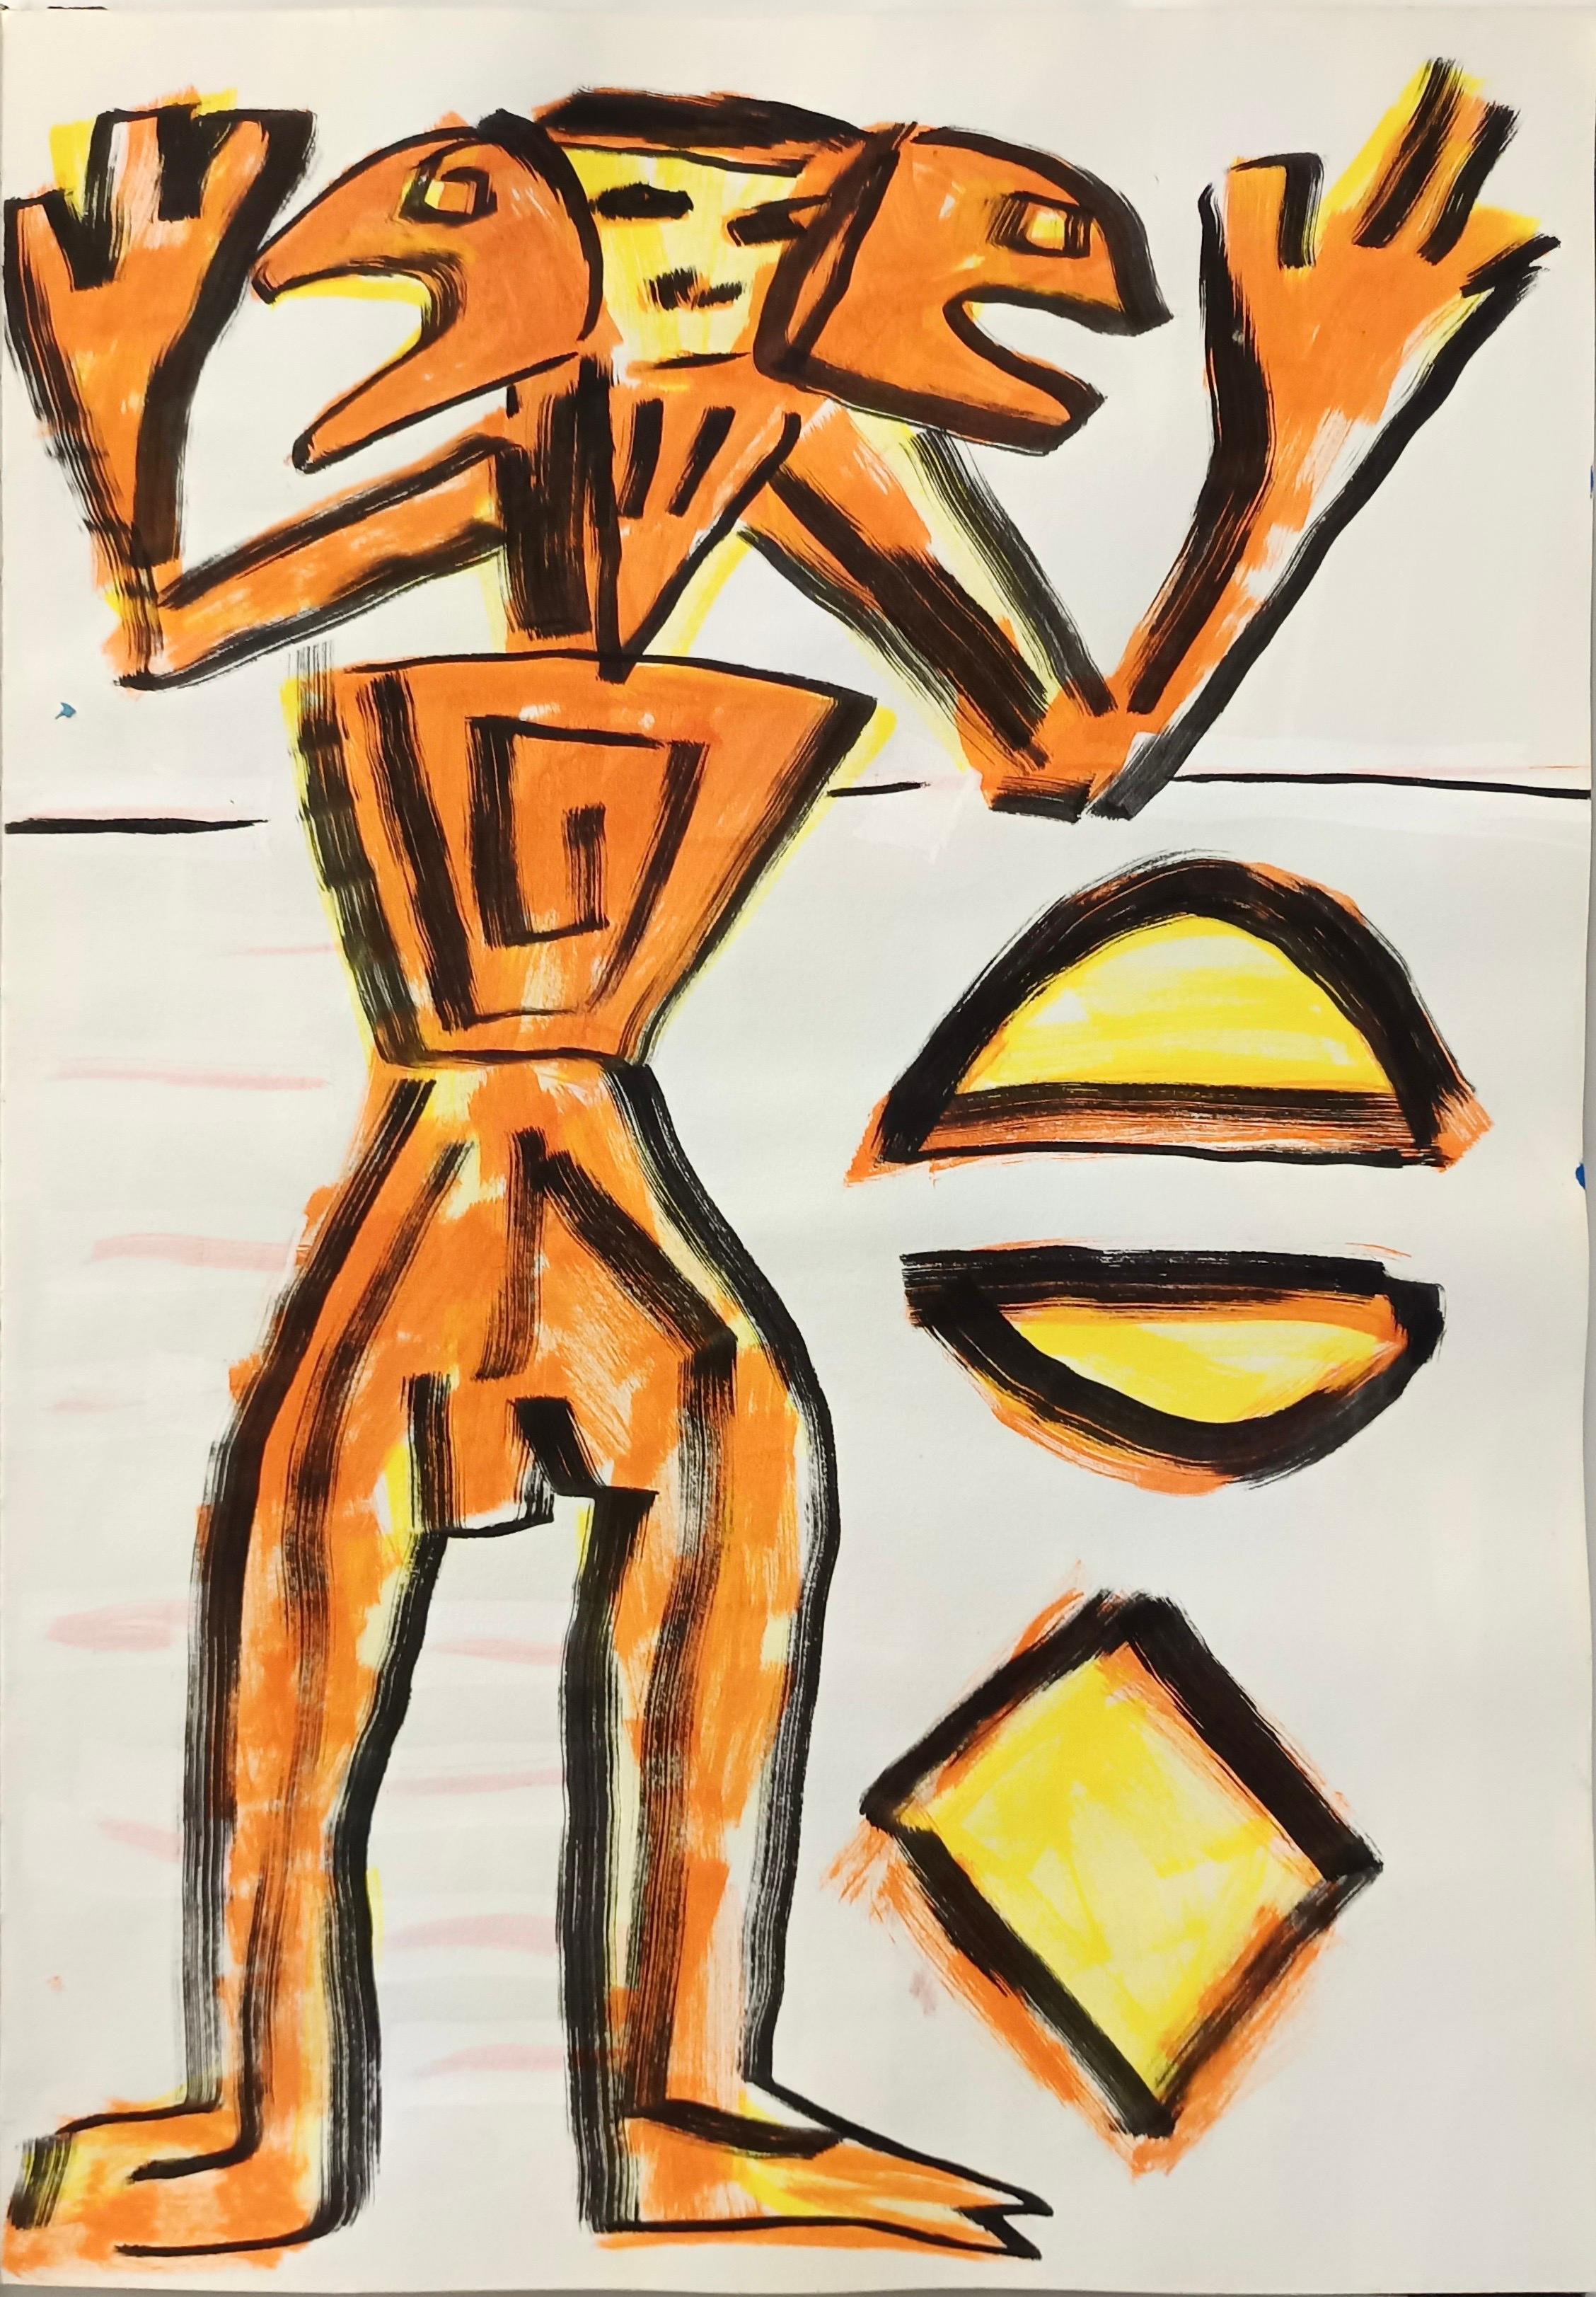 Enzio Wenk Abstract Painting - Untitled by E. Wenk, 2020 - 2021 - Orange and Yellow Acrylic, NeoExpressionism